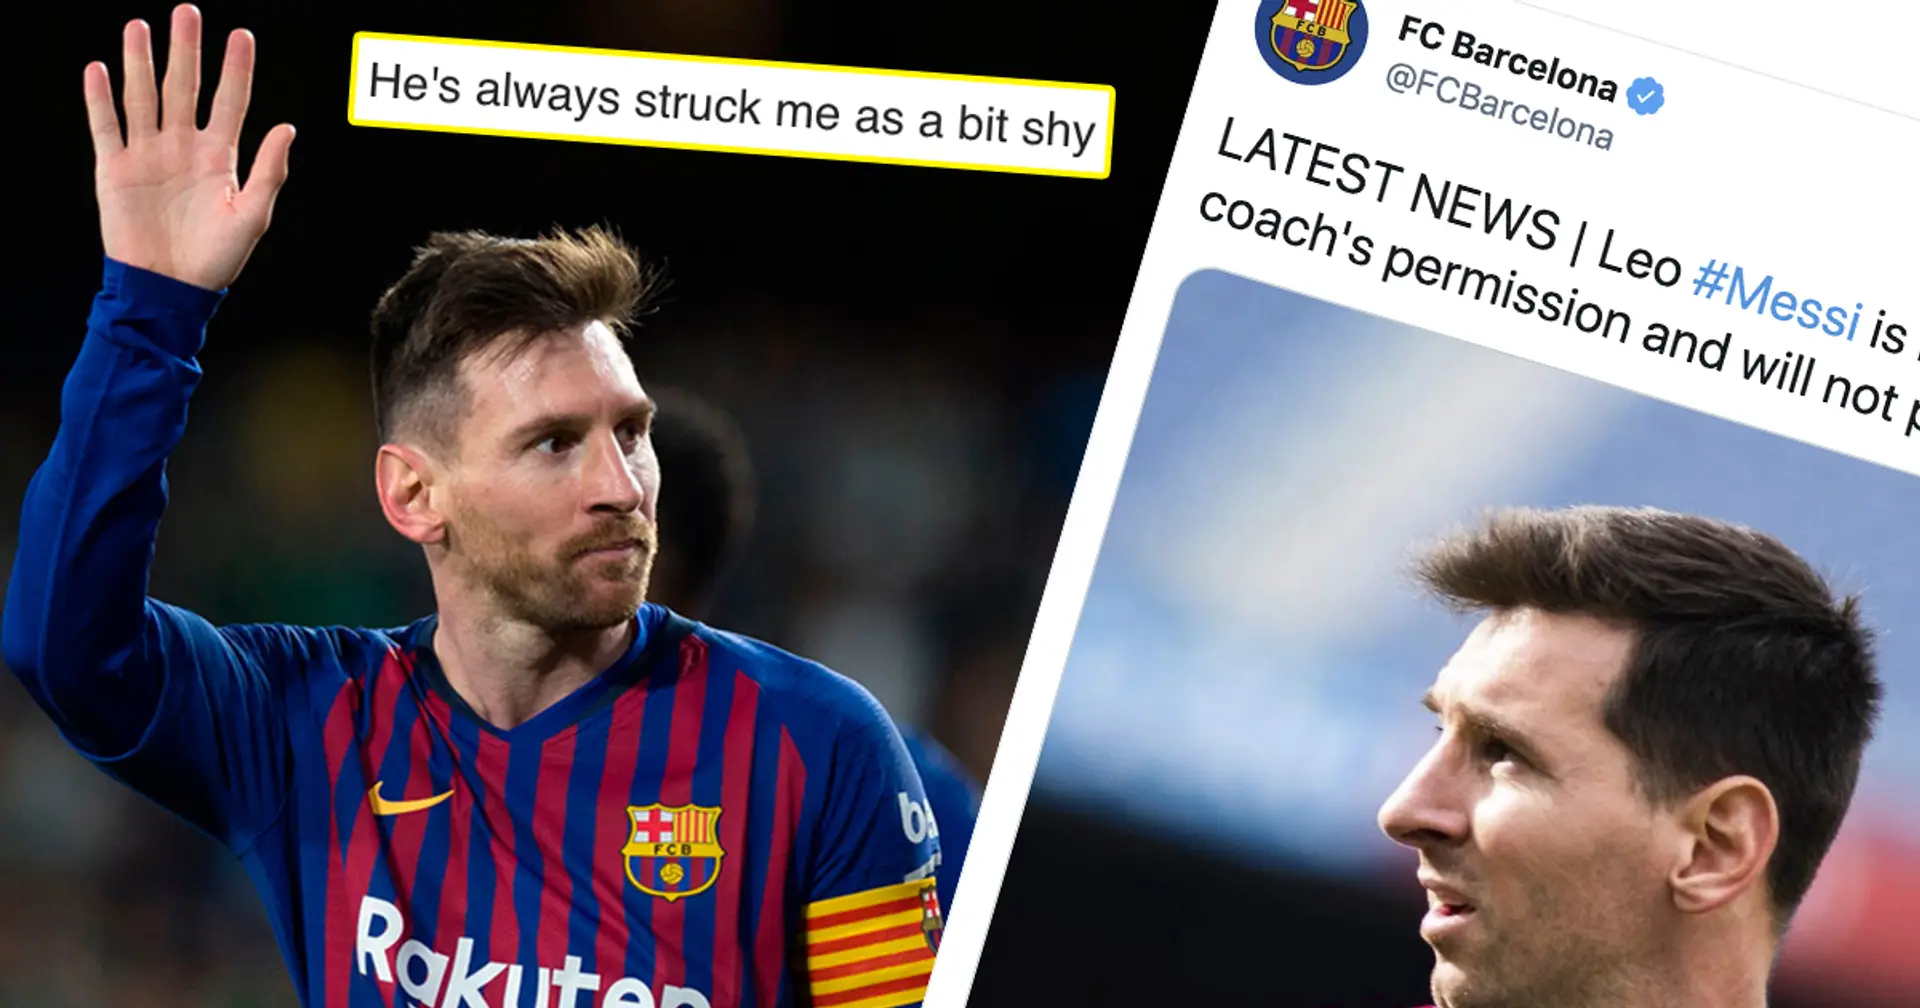 'Wouldn't be surprised if he didn't want to make it public': Fan explains why Messi could've played his last Barca game vs Celta